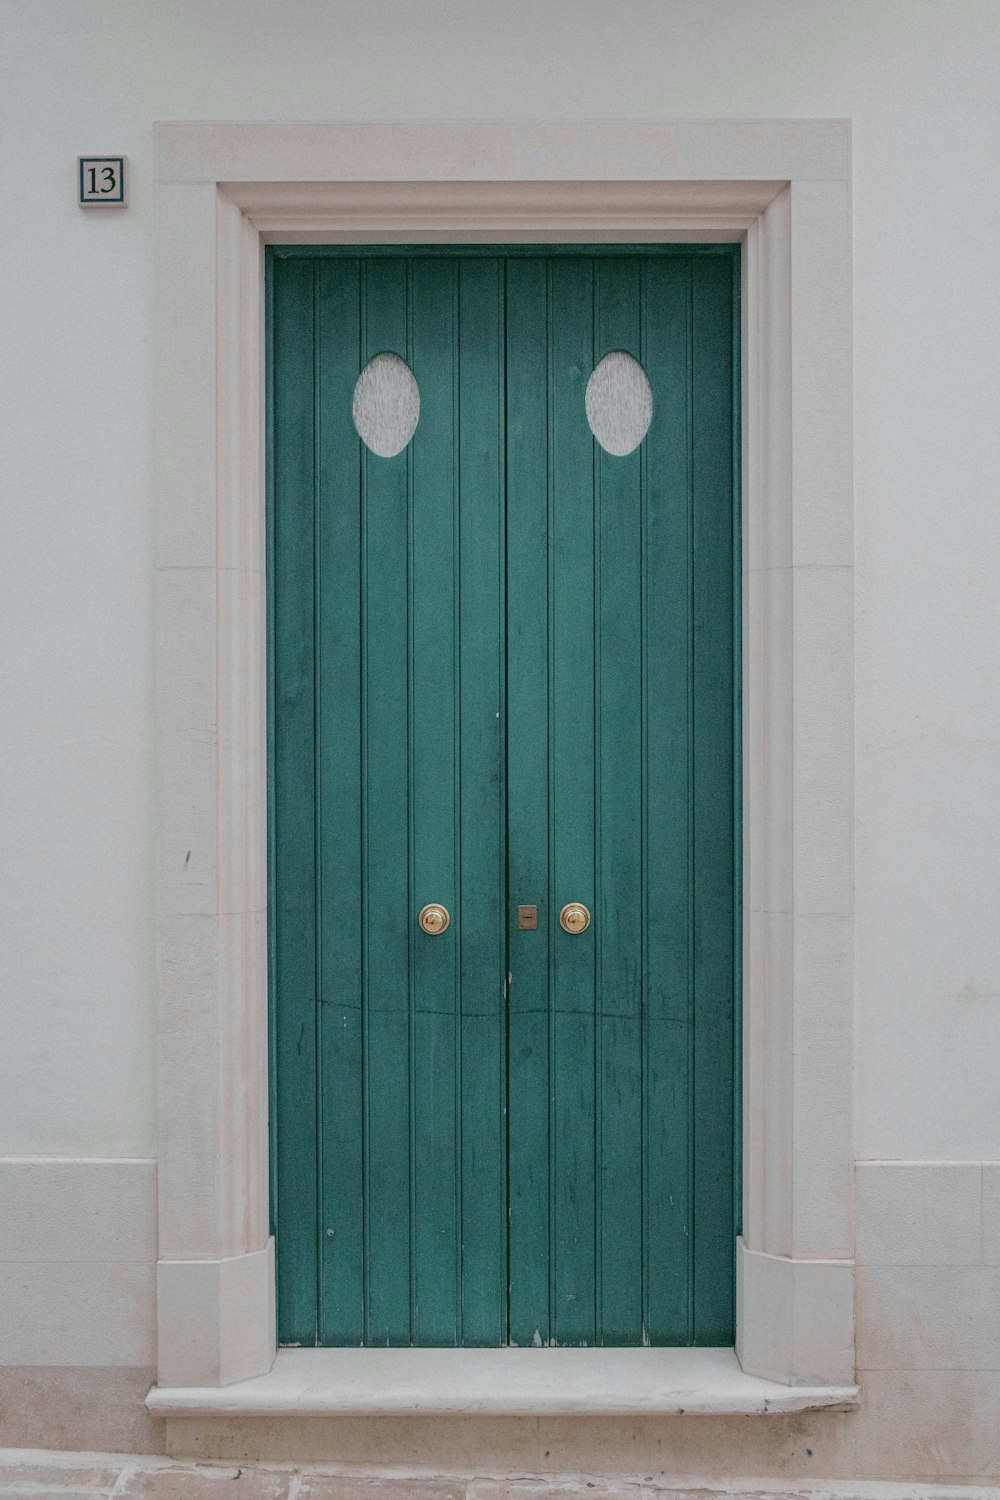 a green door with two round knobs on it